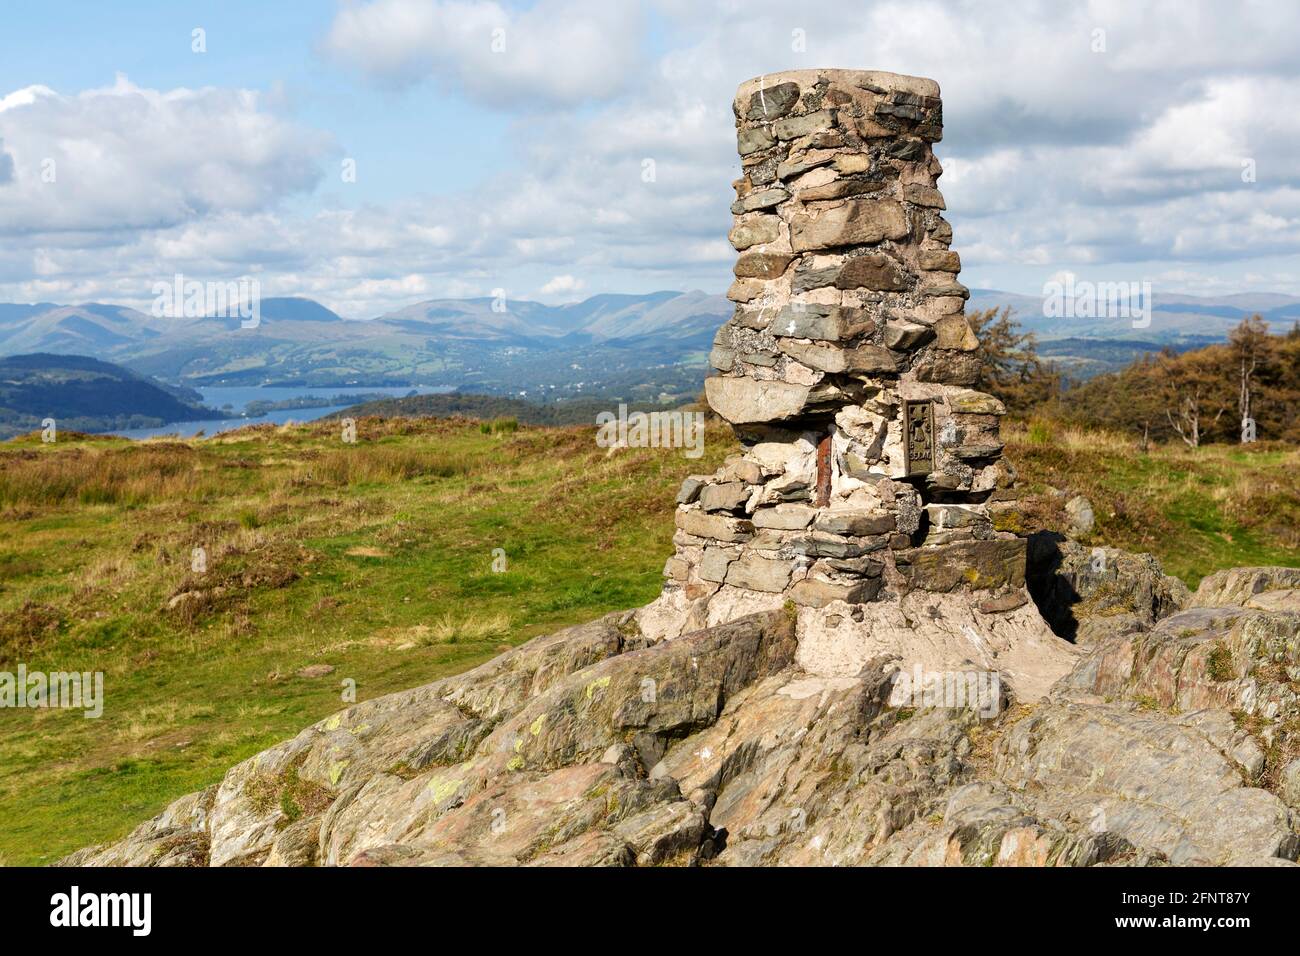 Cairn at Gummer's How above Lake Windermere in Cumbria, England. The landscape is part of the English Lake District. Stock Photo